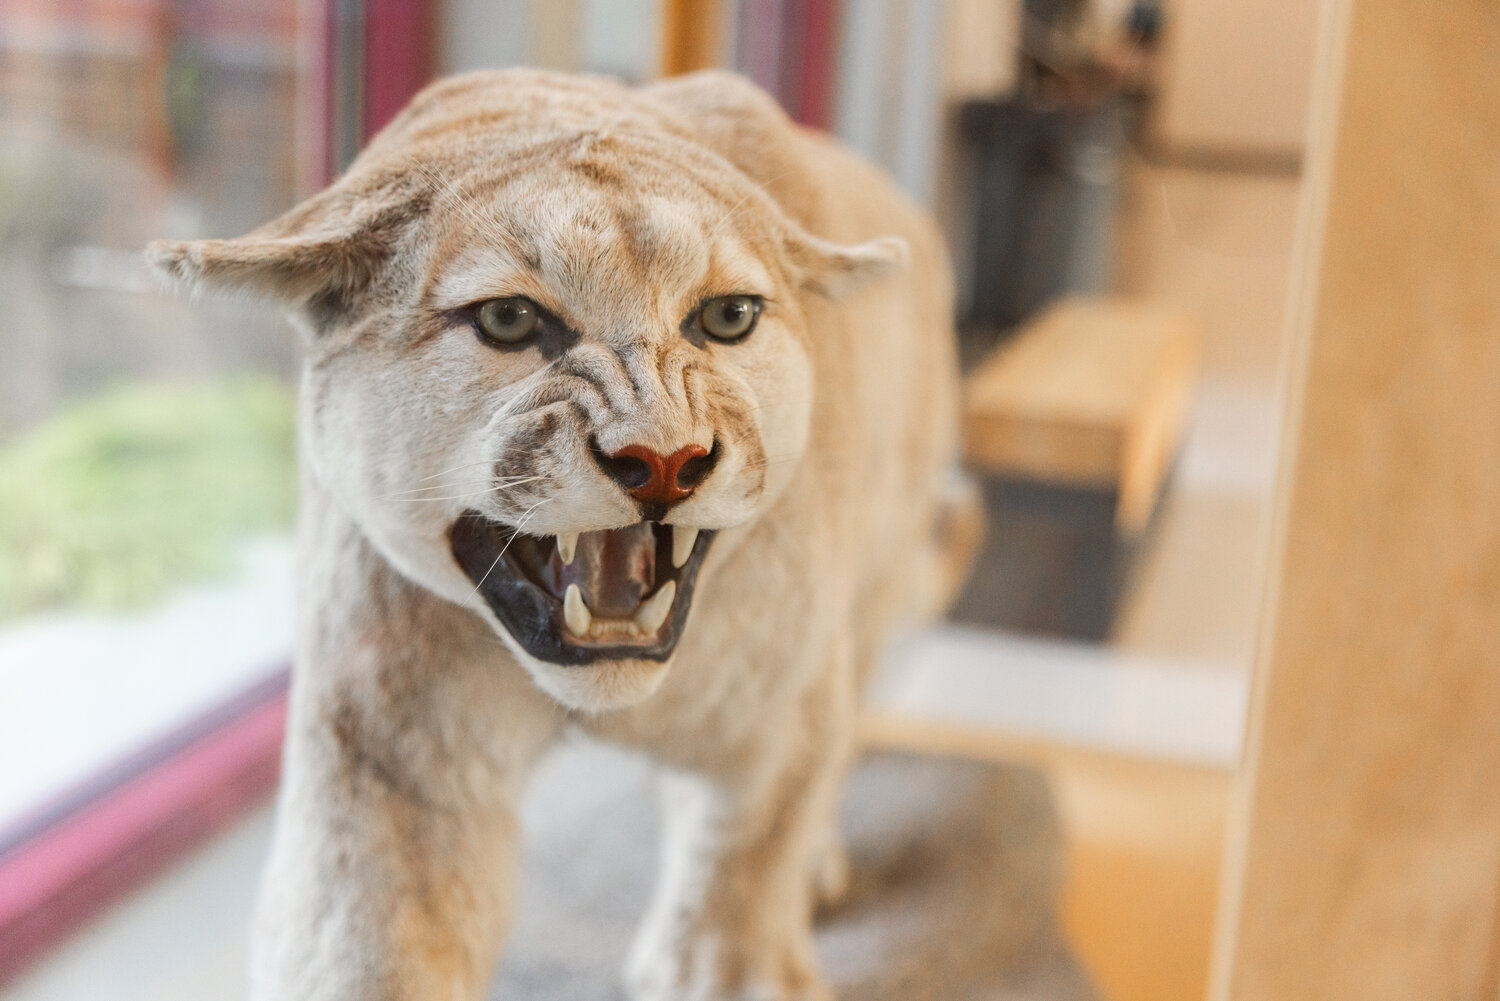 A cougar sits on display inside Orin C. Smith Elementary in Chehalis on Wednesday, Sept. 27.